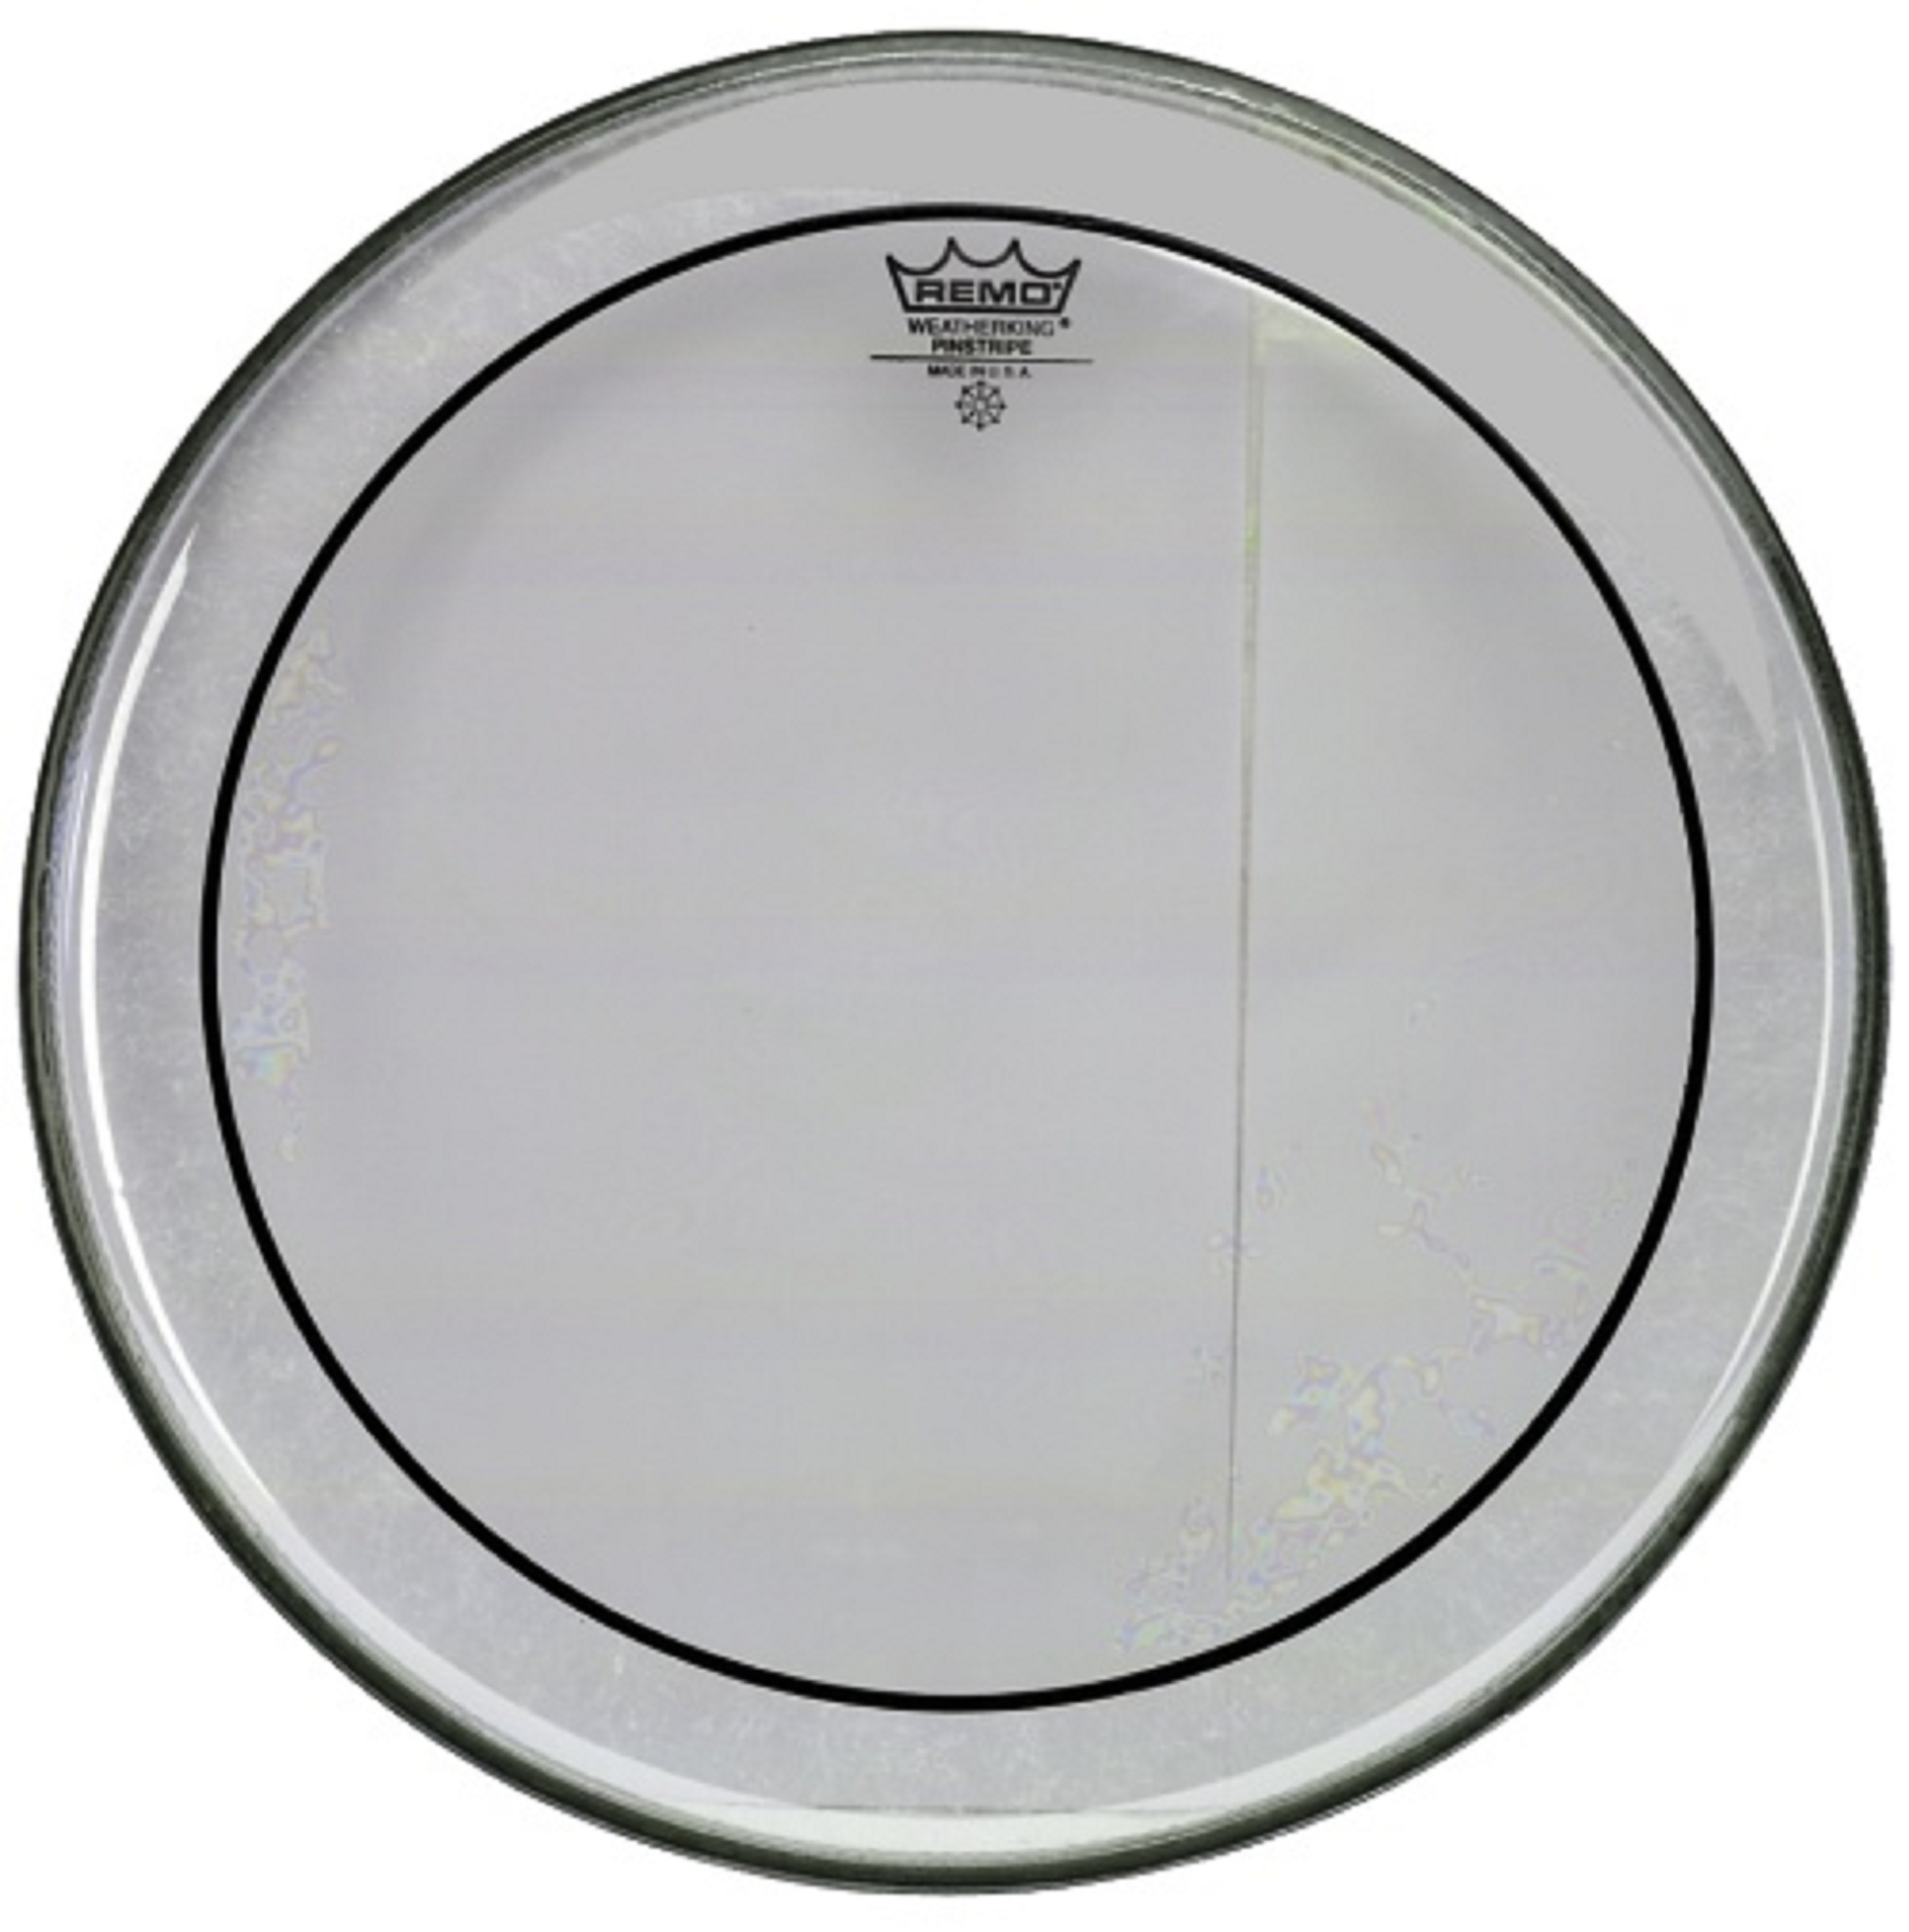 Remo Fell Pinstripe 13" Clear